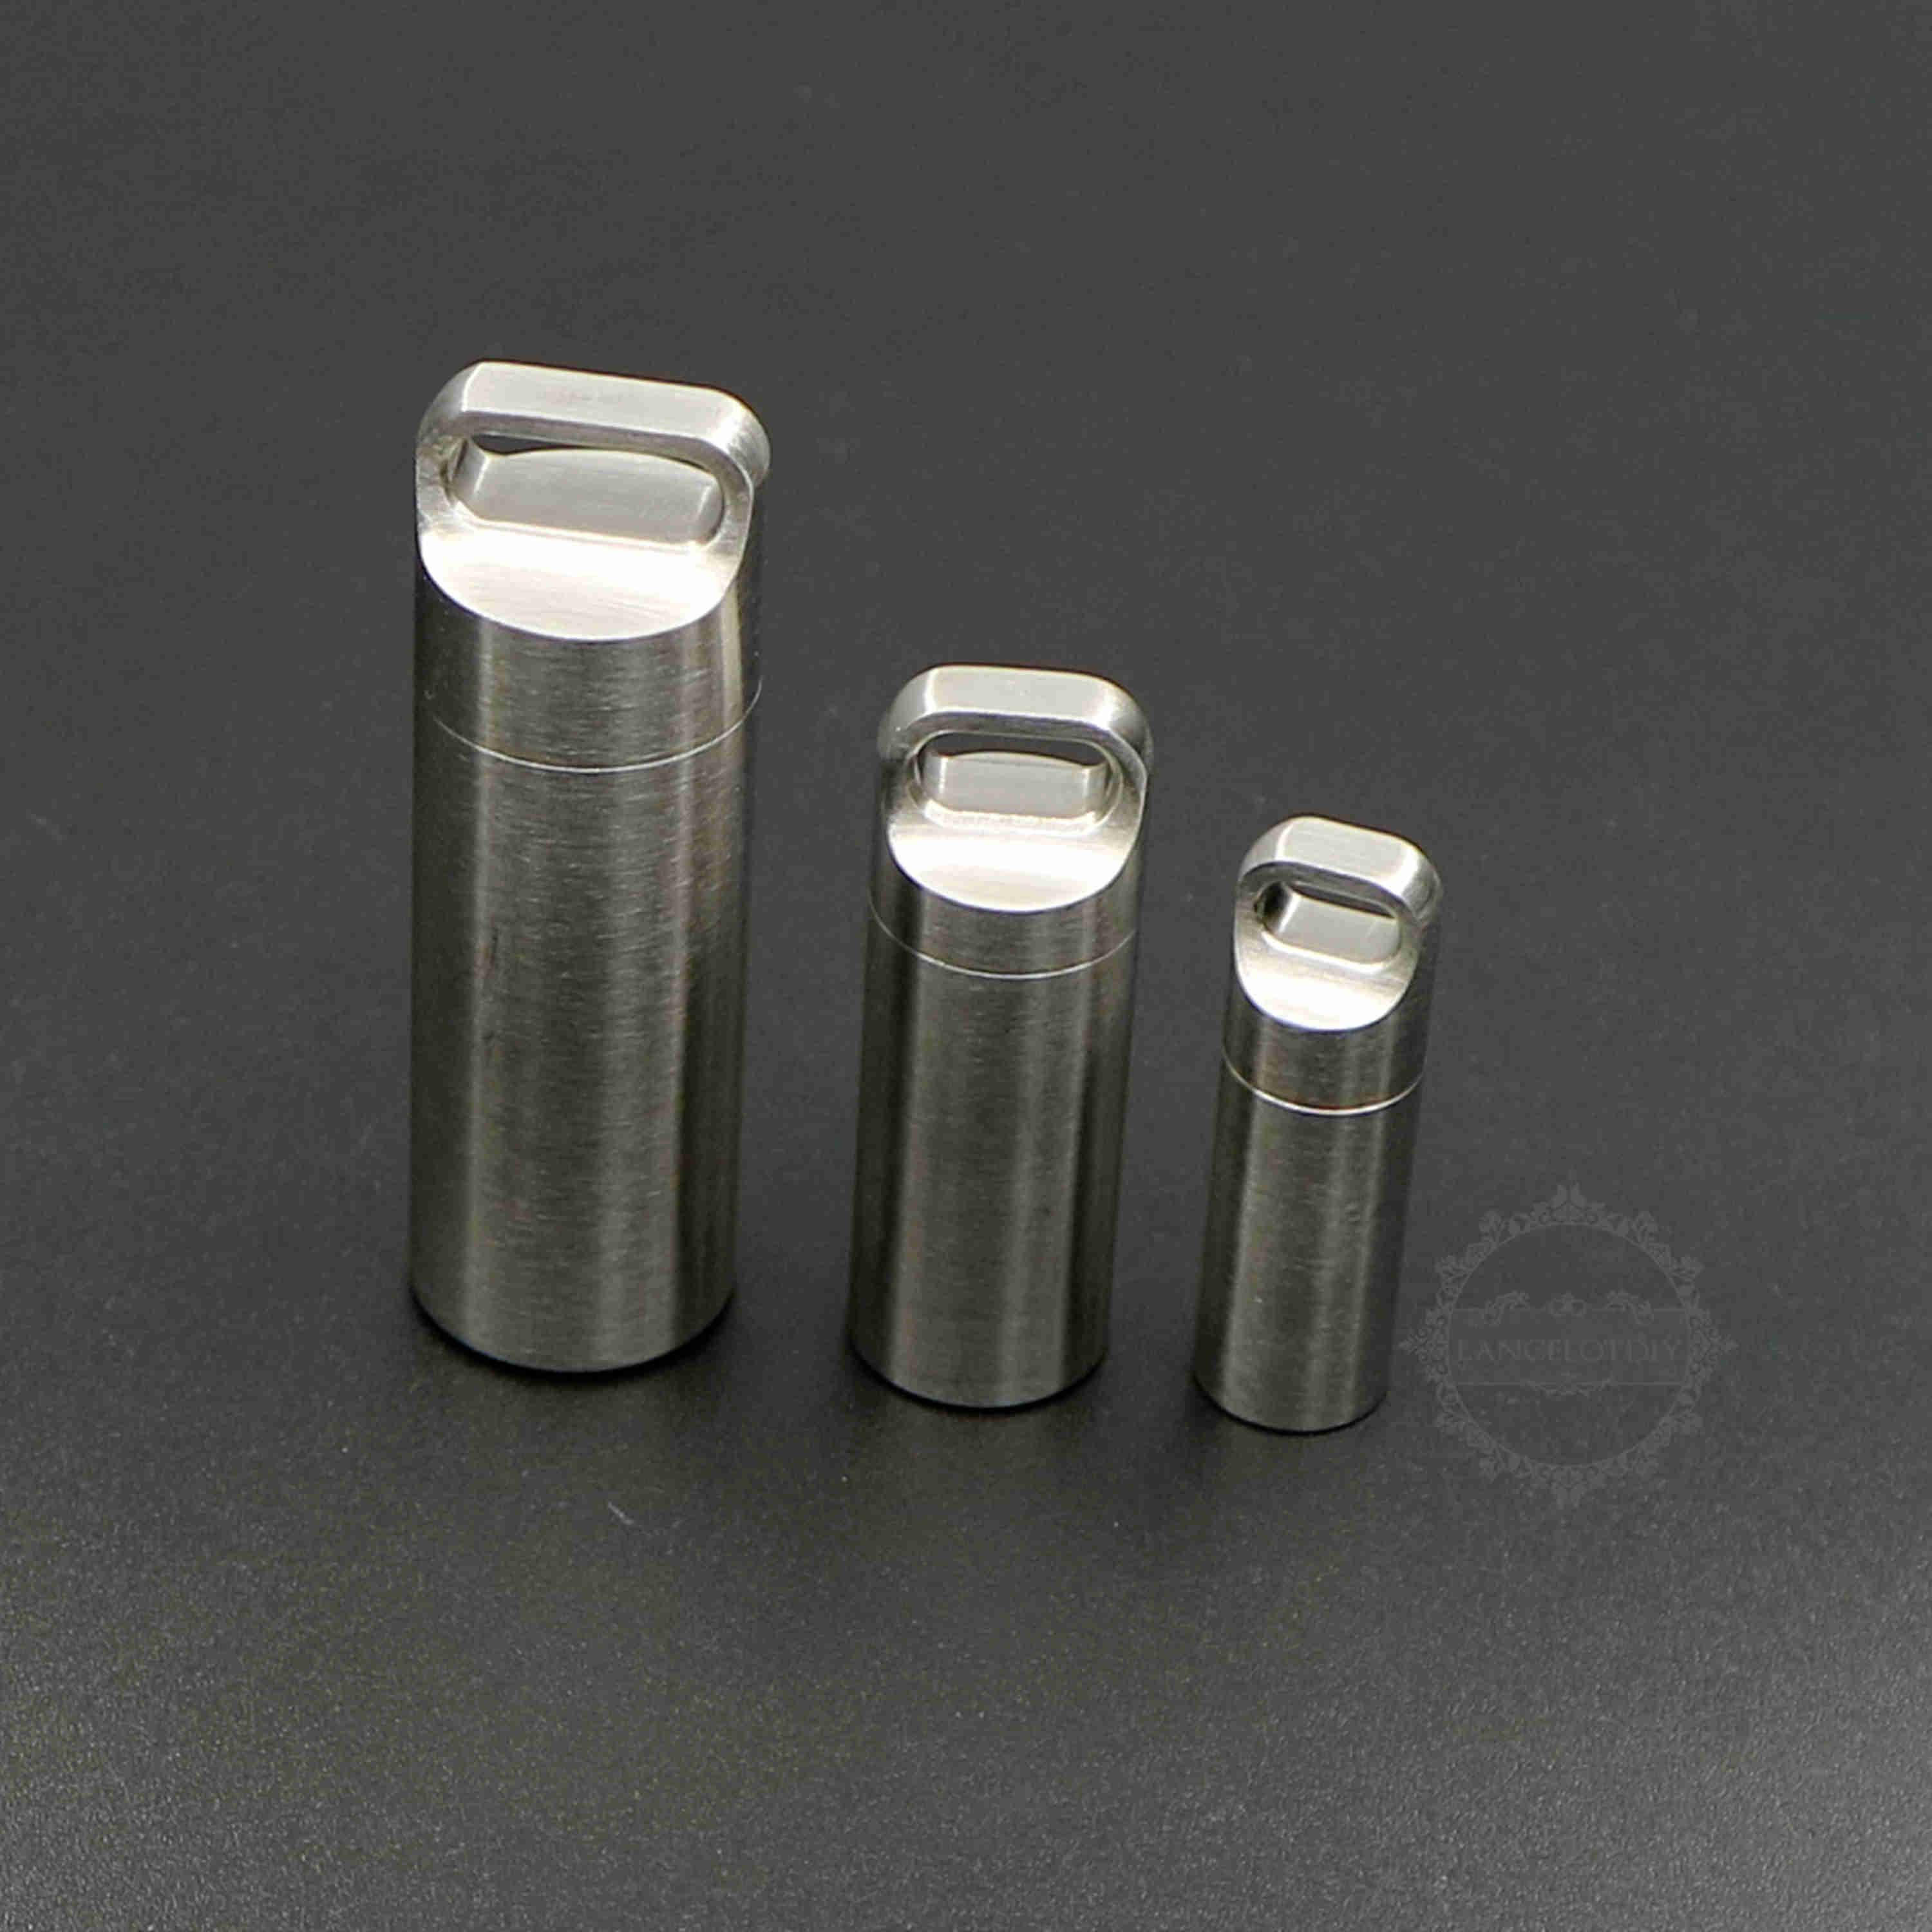 1pcs stainless steel seal cremation bottle perfume holder ash wish vial pendant charm EDC medicine tablet storage box DIY supplies 1800401-2 - Click Image to Close